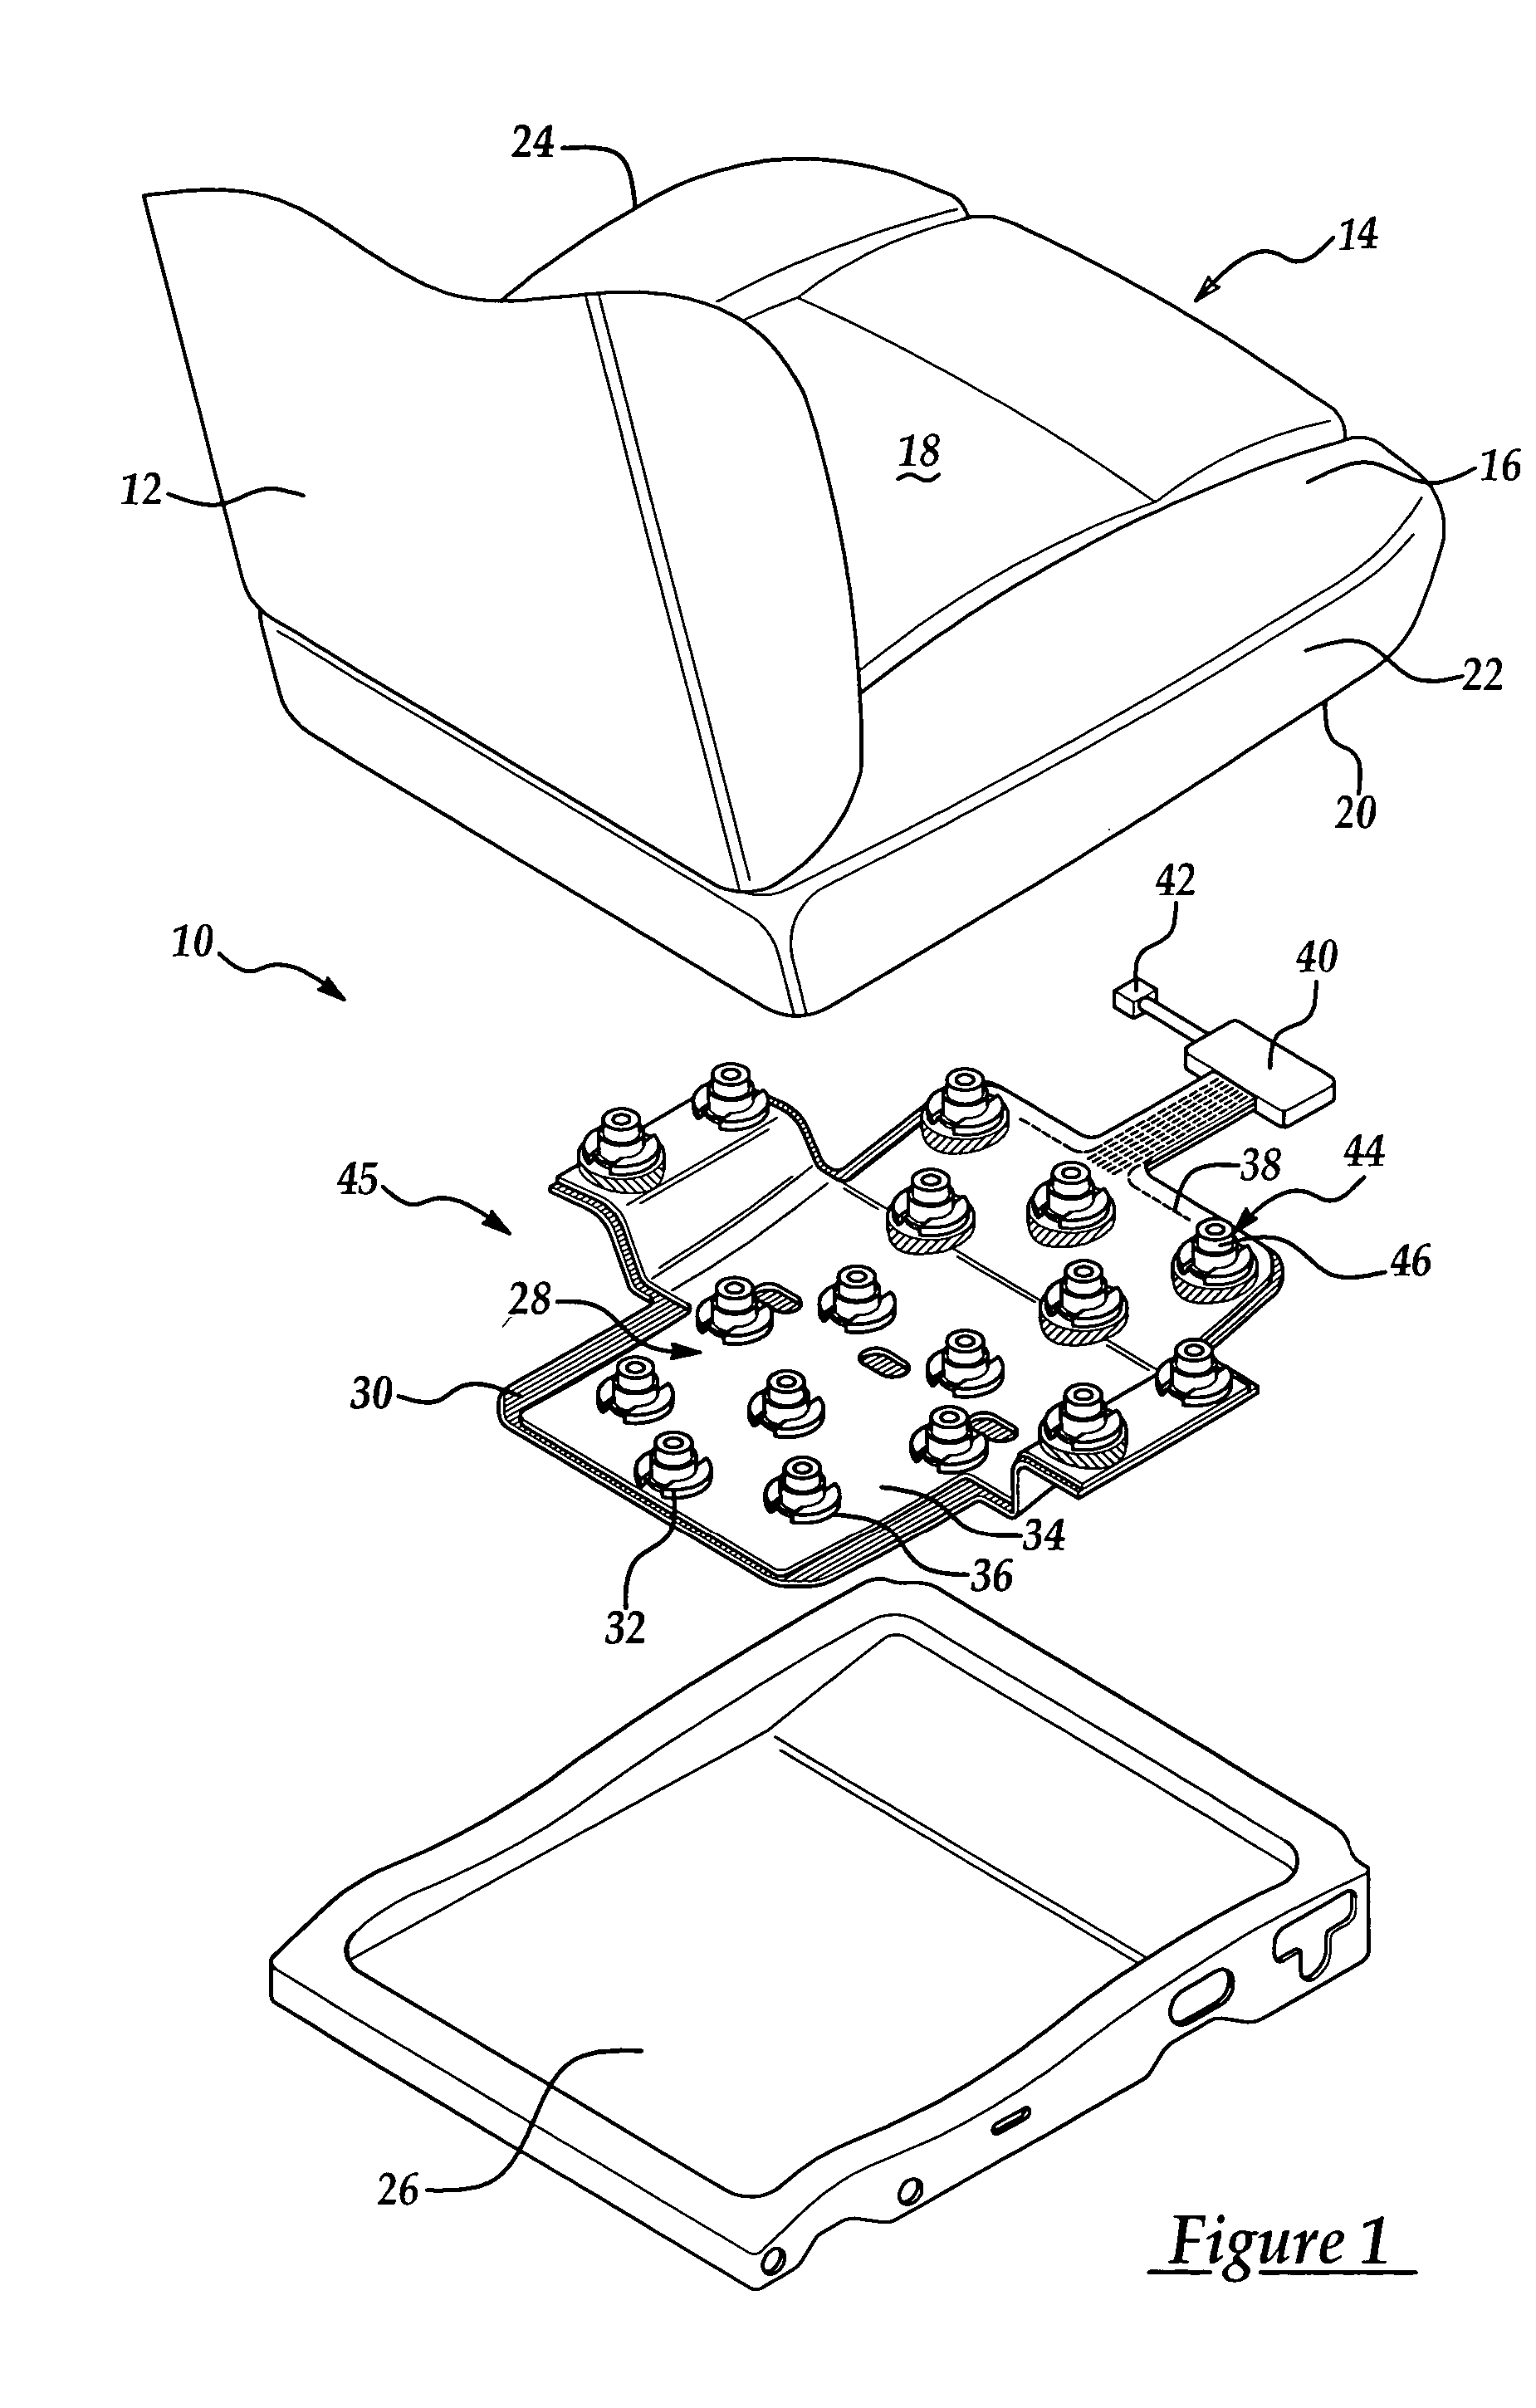 Method of determining an equivalent value for a failed sensor in a vehicle seat having an occupancy sensing system